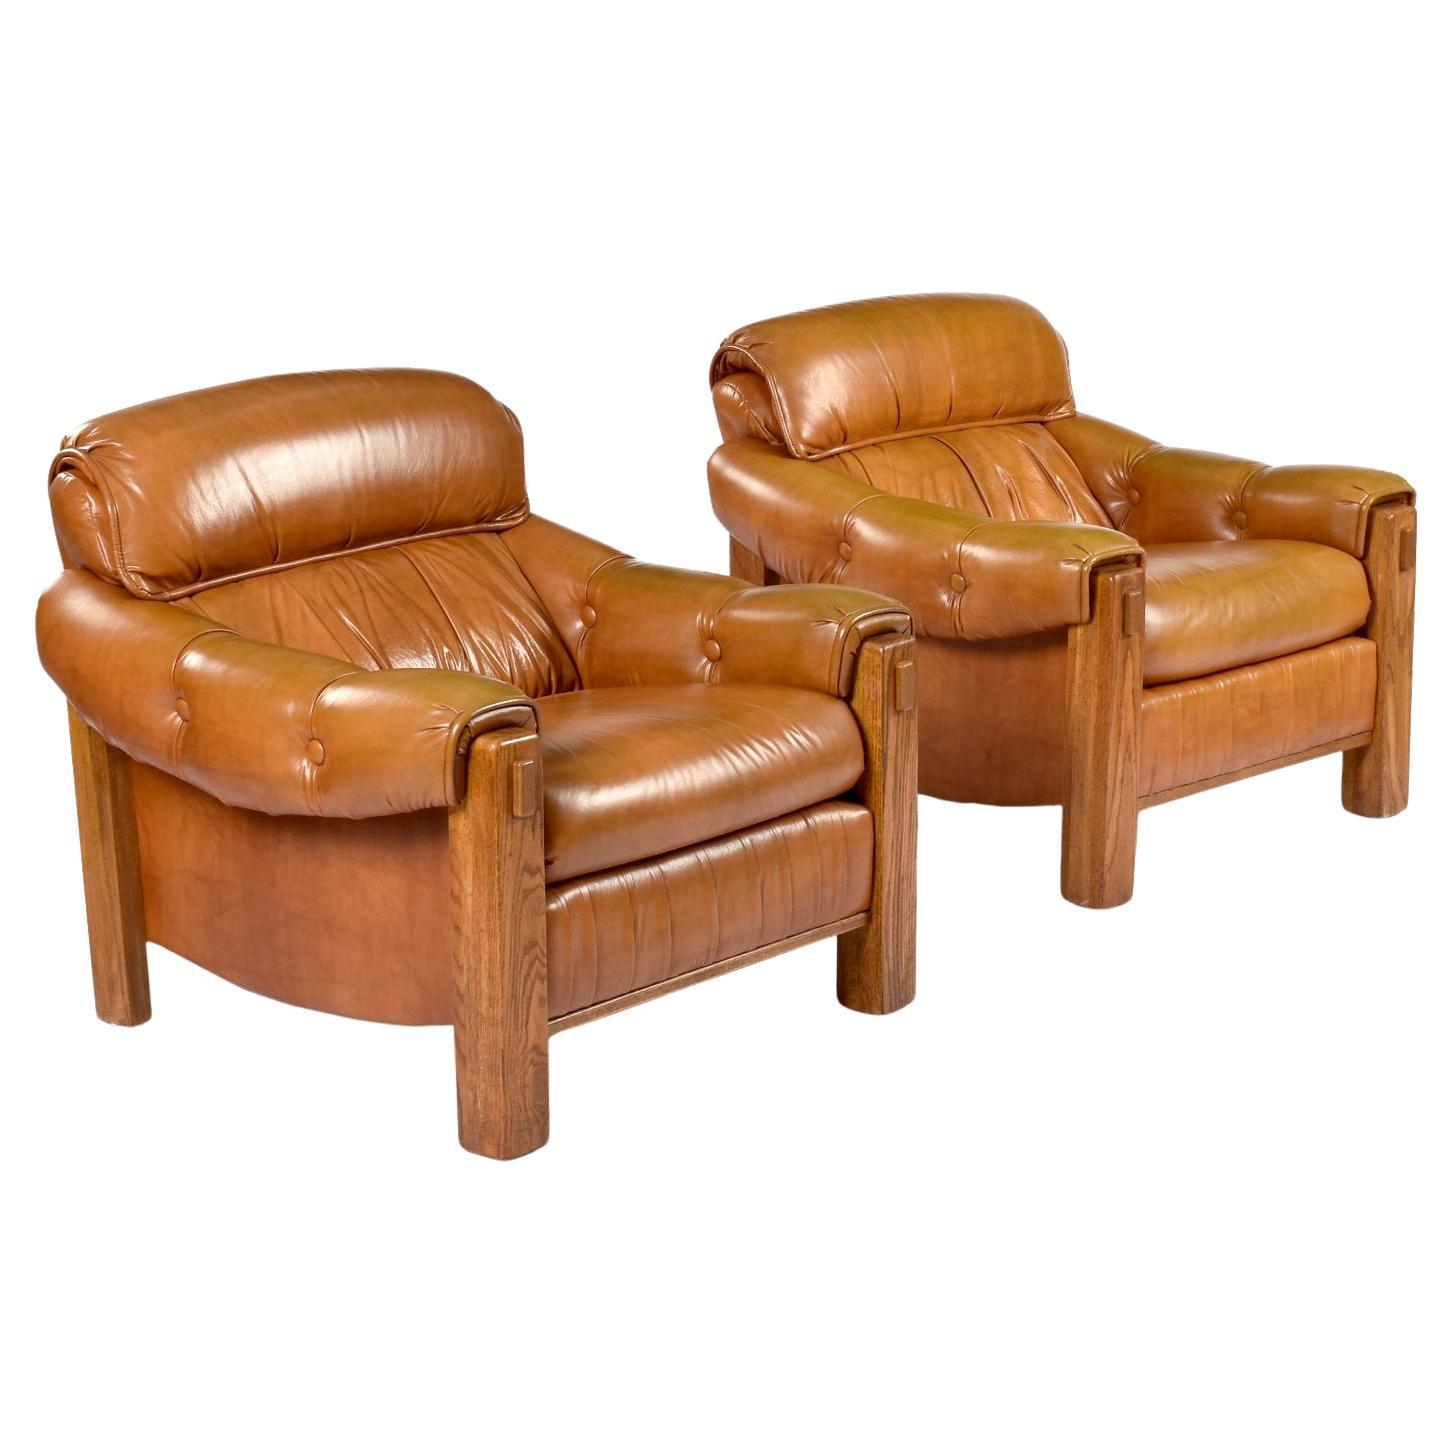 Pair of Vintage 1970s Ample Butterscotch Brown and Oak Tufted Club Chairs For Sale